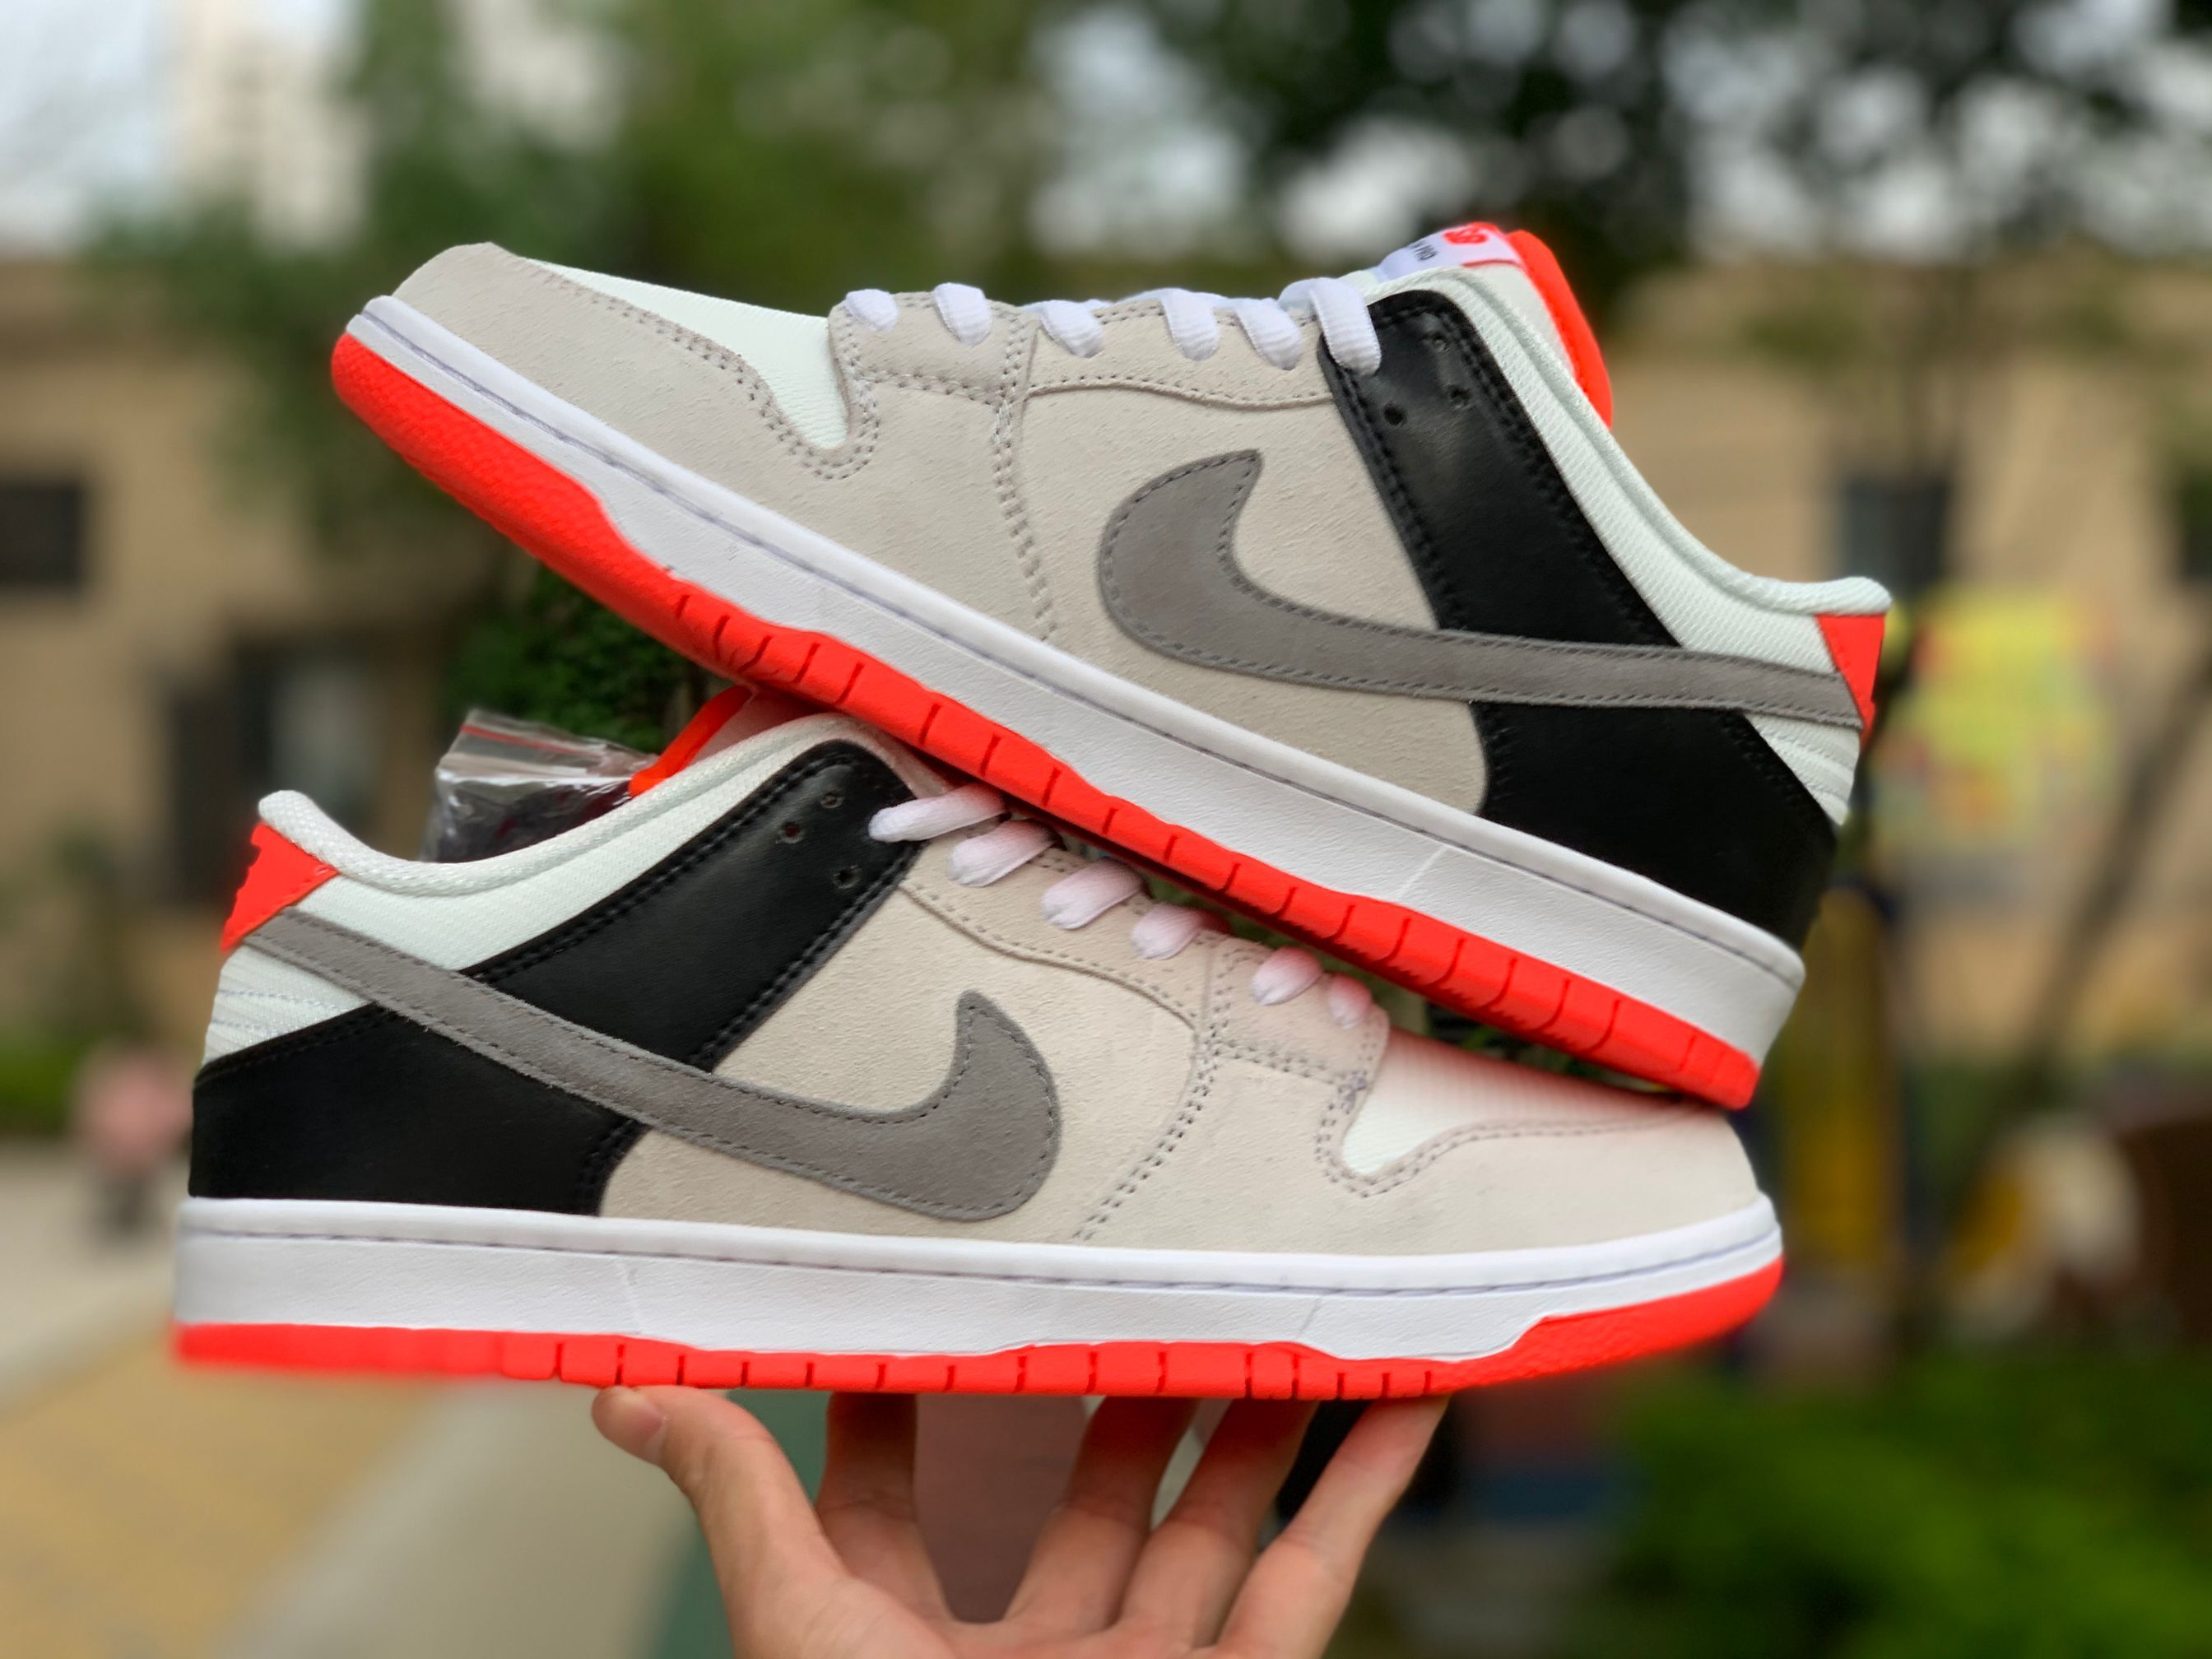 2020 Release Nike SB Dunk Low “Infrared” Skate Shoes CD2563-004